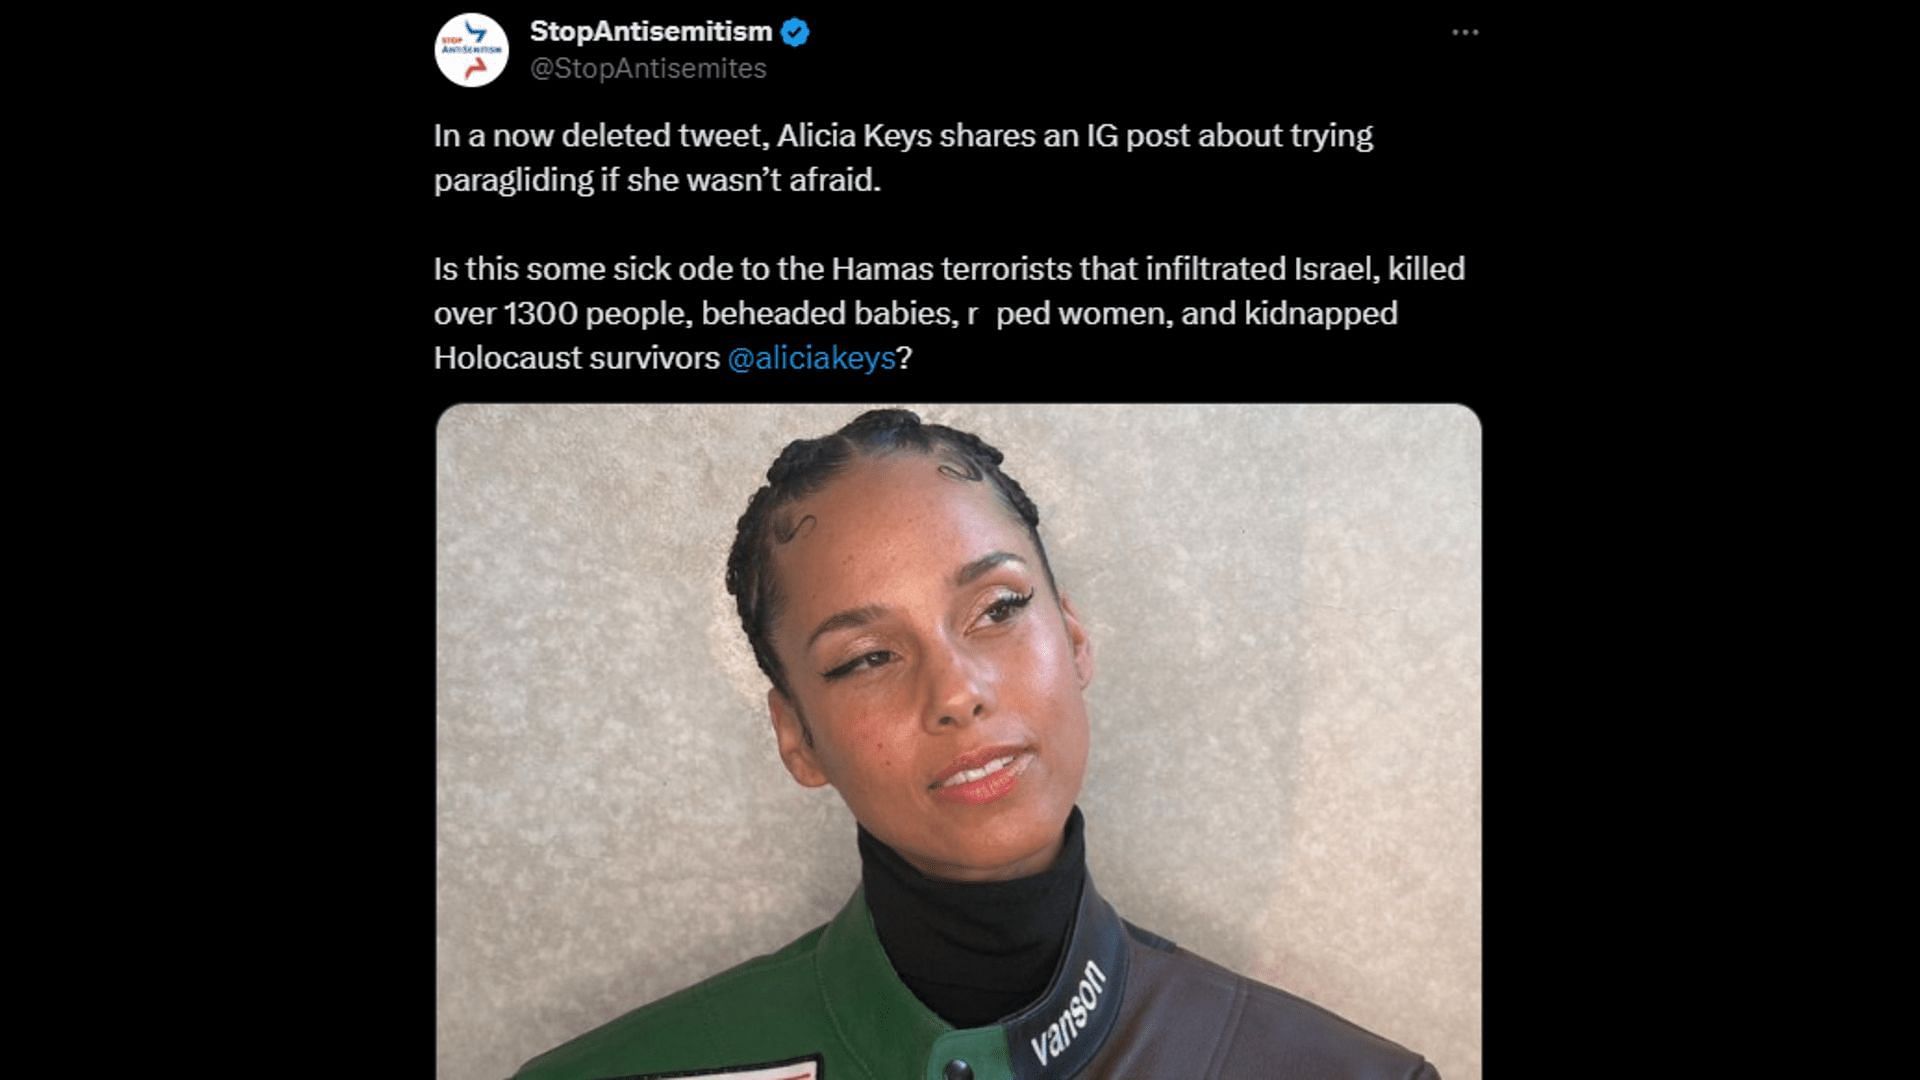 A group on Twitter accuses Alicia of being antisemitic. (Image via X/StopAntisemitism)